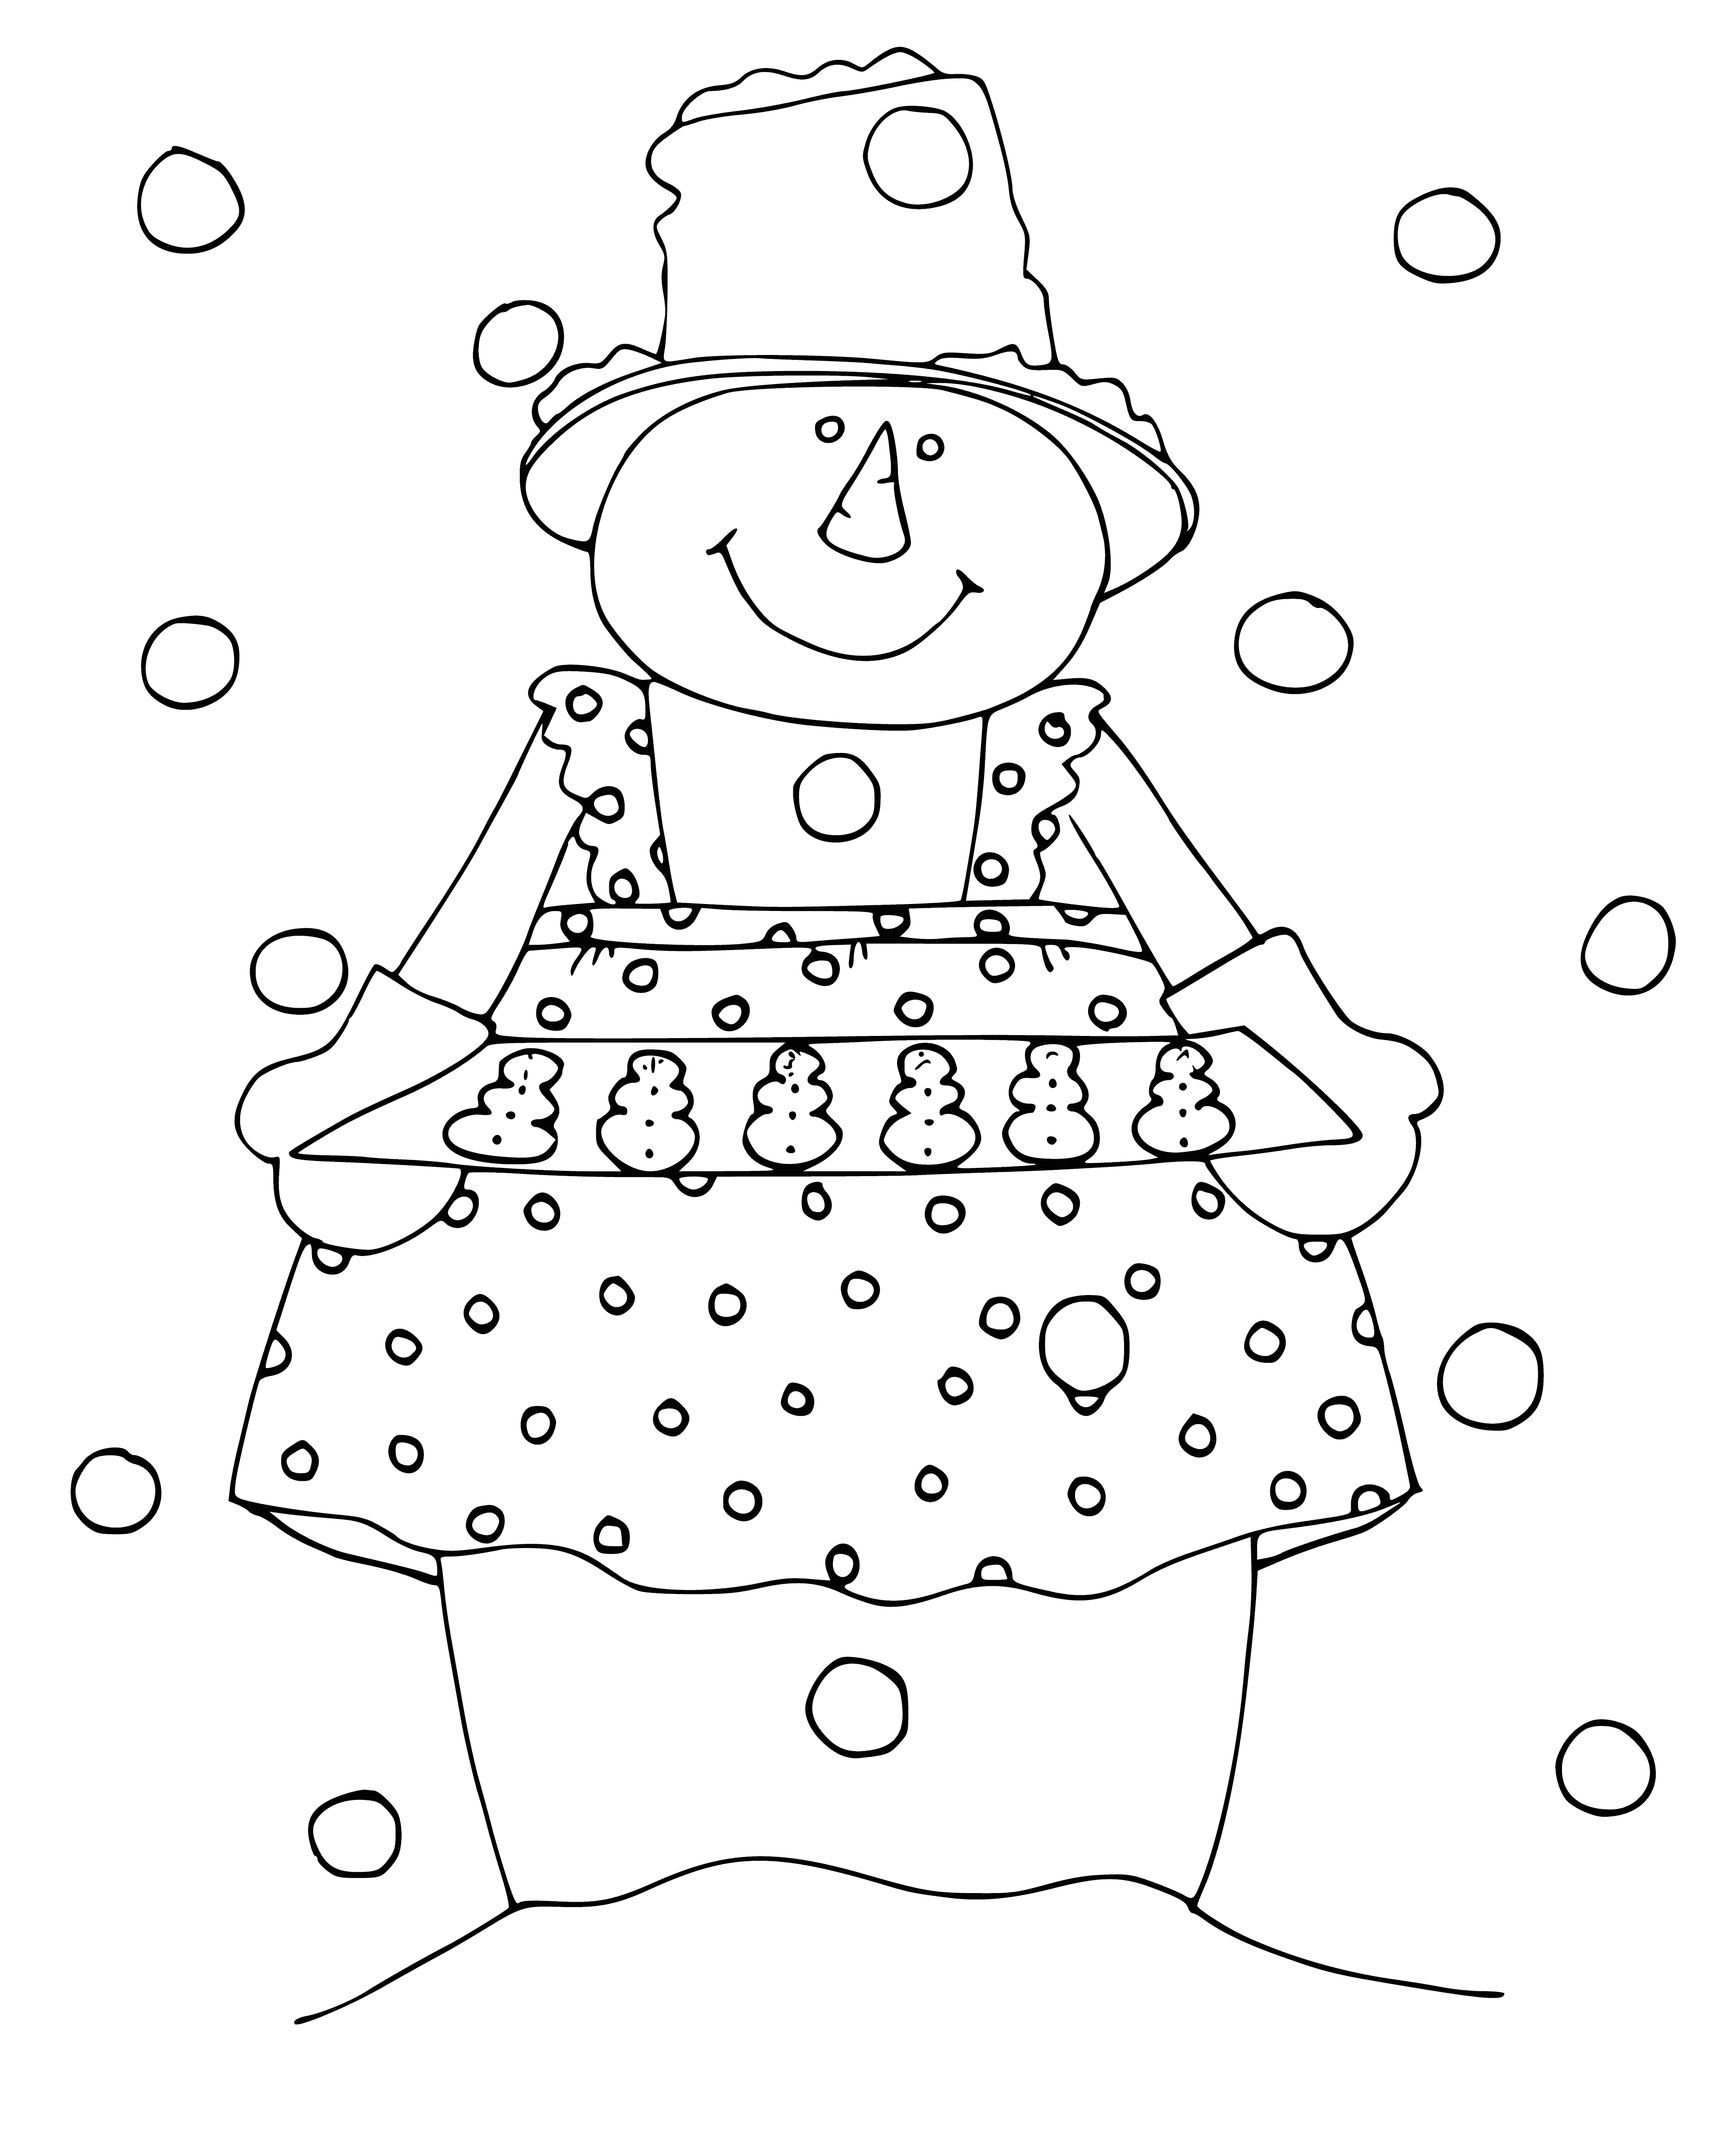 coloring page: A cheerful snowman, with arms outstretched and a big smile, enjoying the snow and winter weather.